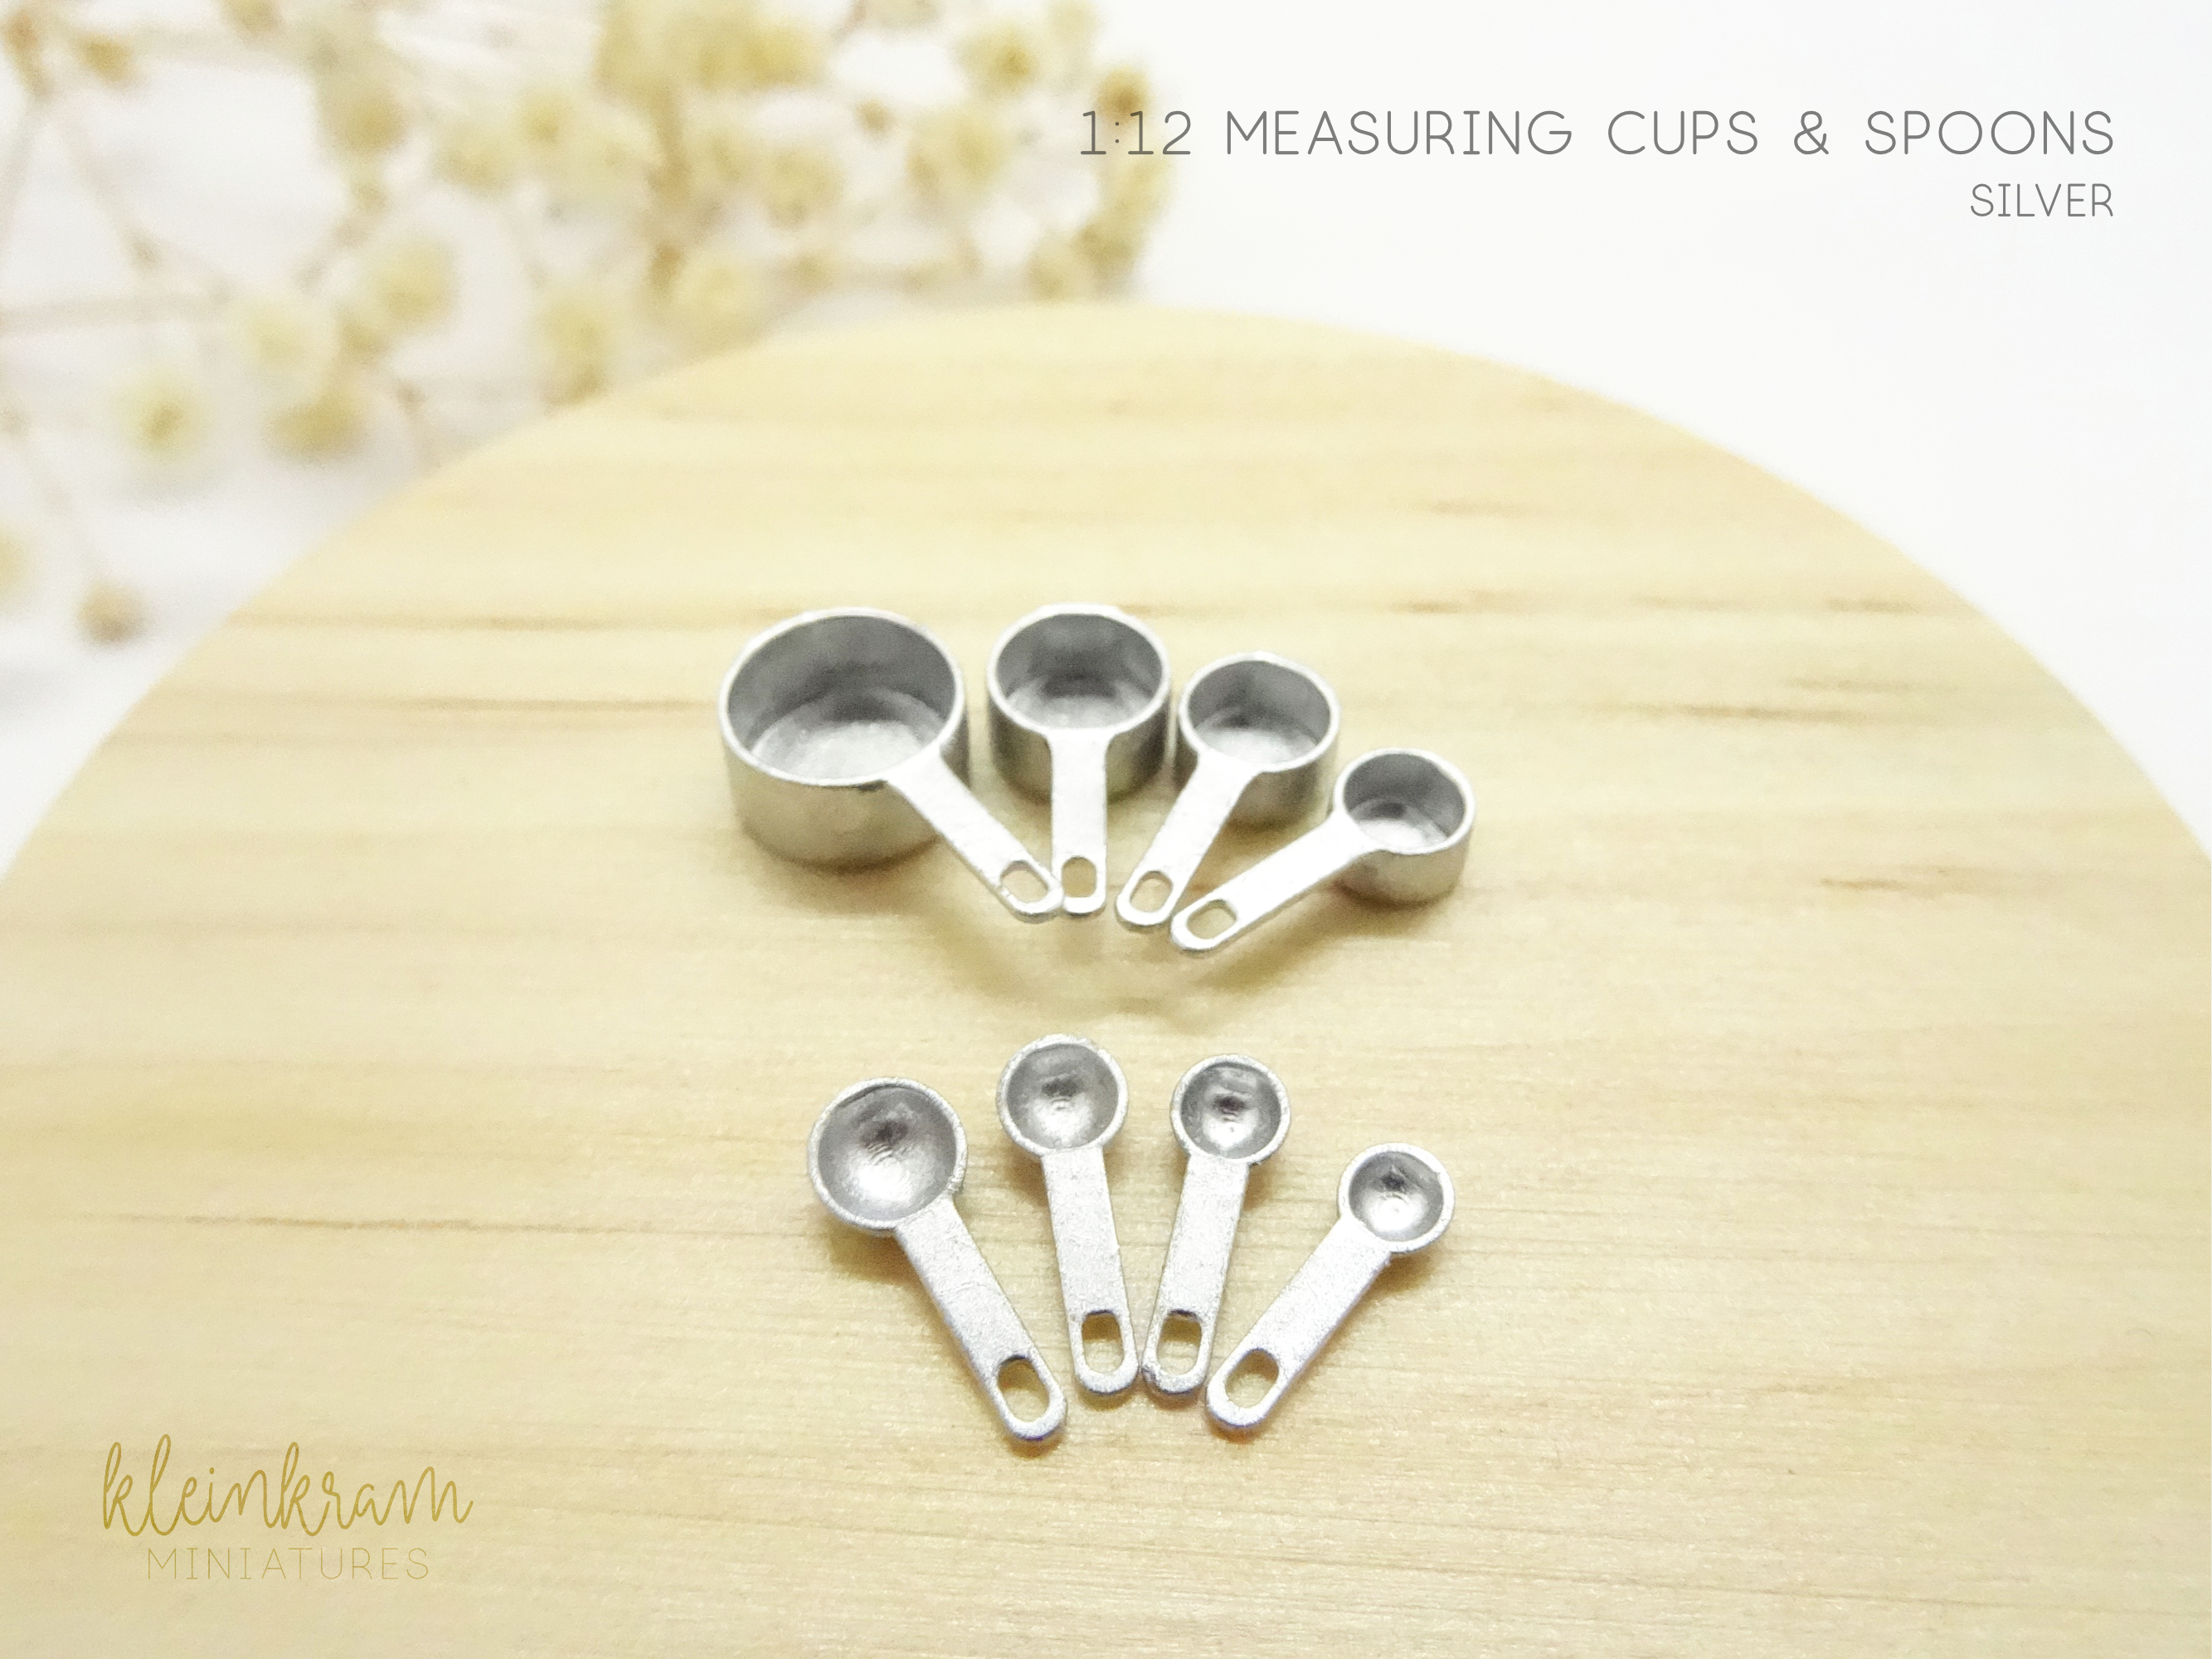 Measuring Cups & Spoons - 1:12 Miniature